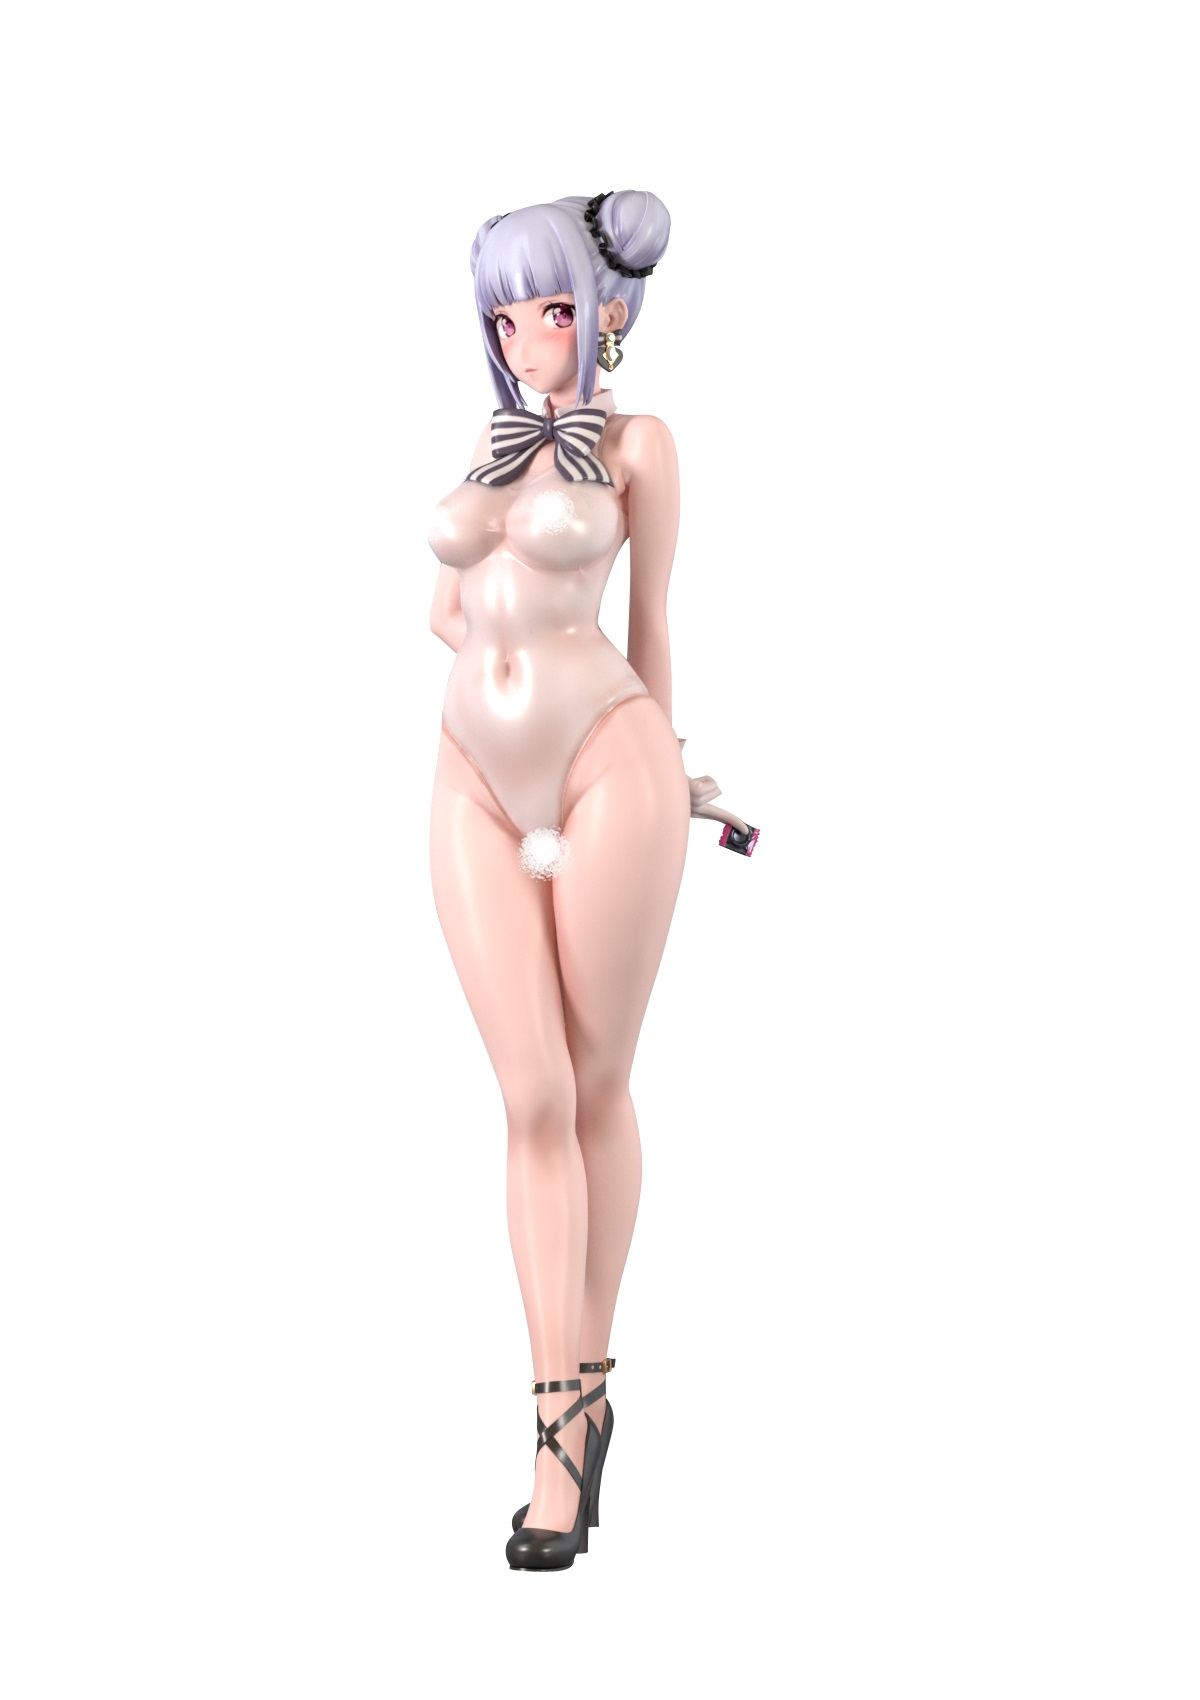 NECOMETAL 1/7 SCALE PAINTED FIGURE: SHEER WHITE SCHOOL SWIMSUIT Insight